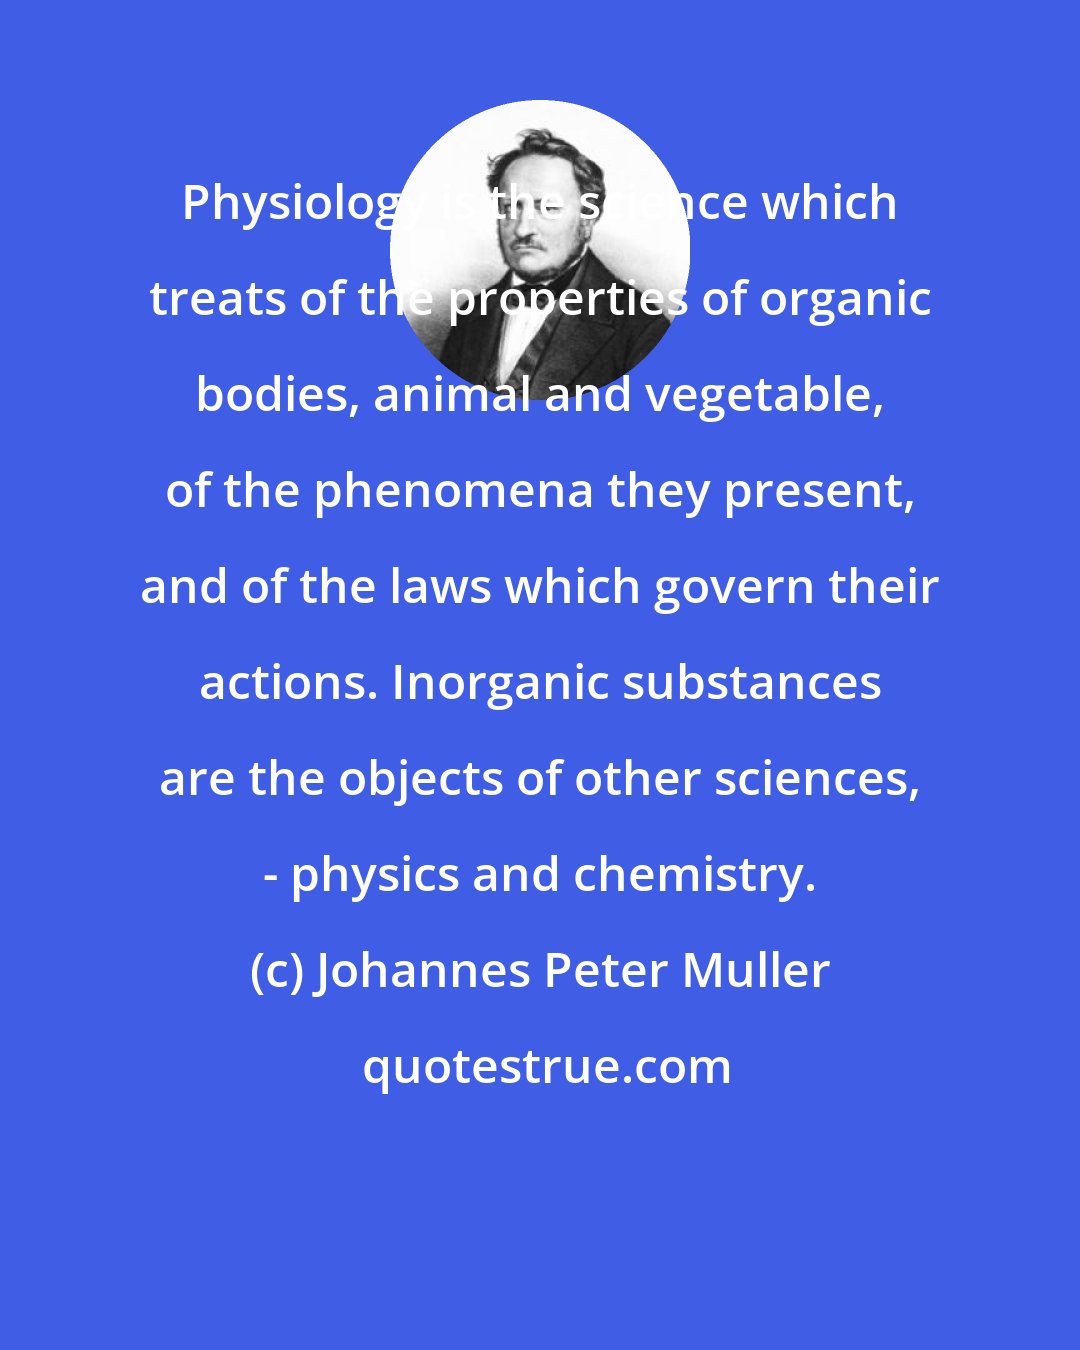 Johannes Peter Muller: Physiology is the science which treats of the properties of organic bodies, animal and vegetable, of the phenomena they present, and of the laws which govern their actions. Inorganic substances are the objects of other sciences, - physics and chemistry.